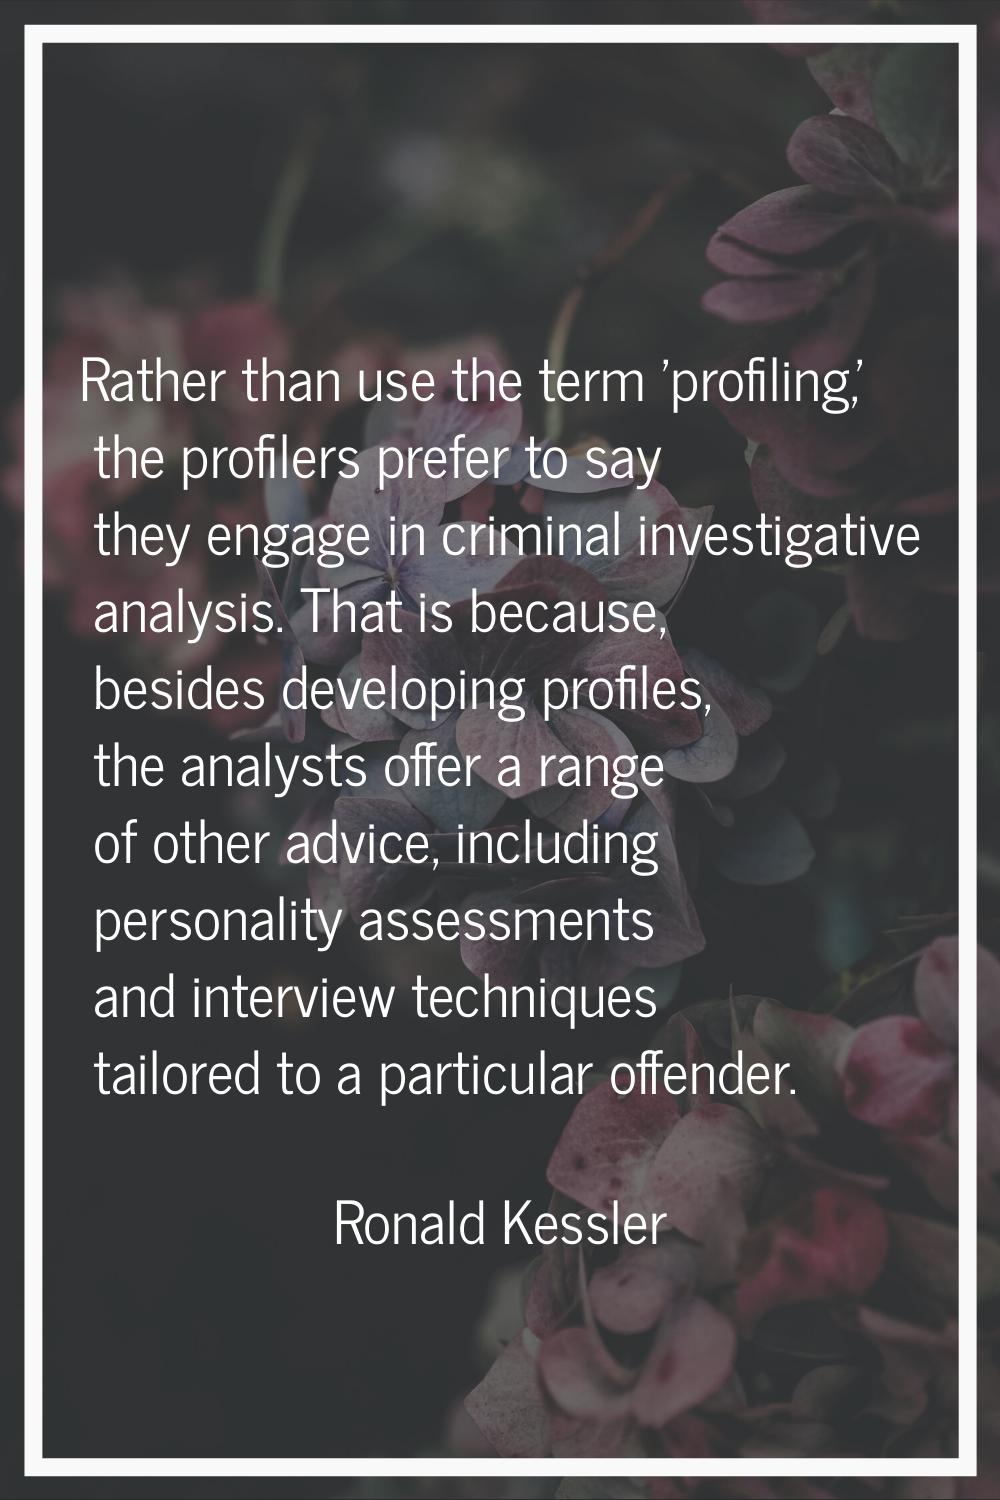 Rather than use the term 'profiling,' the profilers prefer to say they engage in criminal investiga